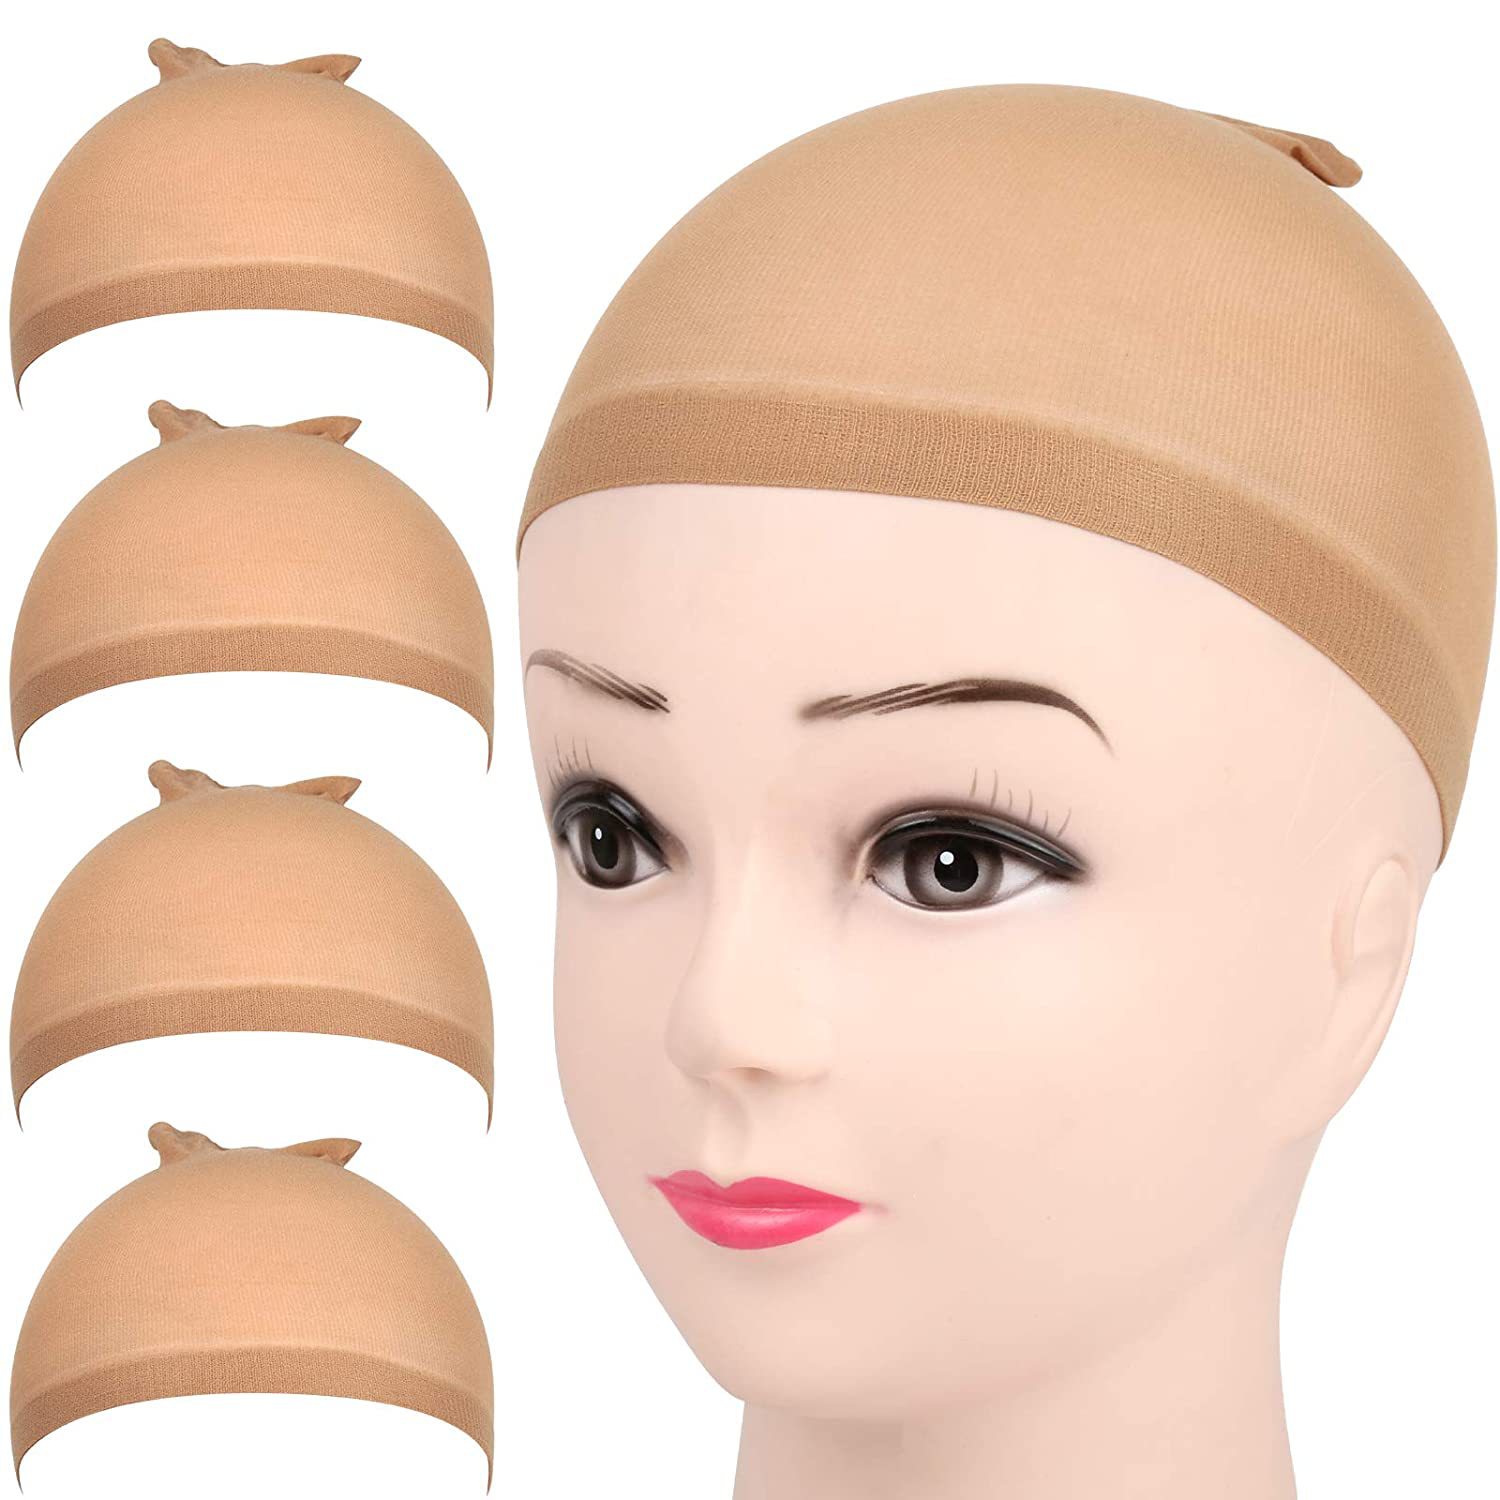  YTBYT 2 Pcs 1.4X3 Inch U Part Wig Cap for Making Wig Medium  Brown Lace Wig Cap Dome Mesh Stretch Weaving Wig Caps (Medium Black) :  Beauty & Personal Care